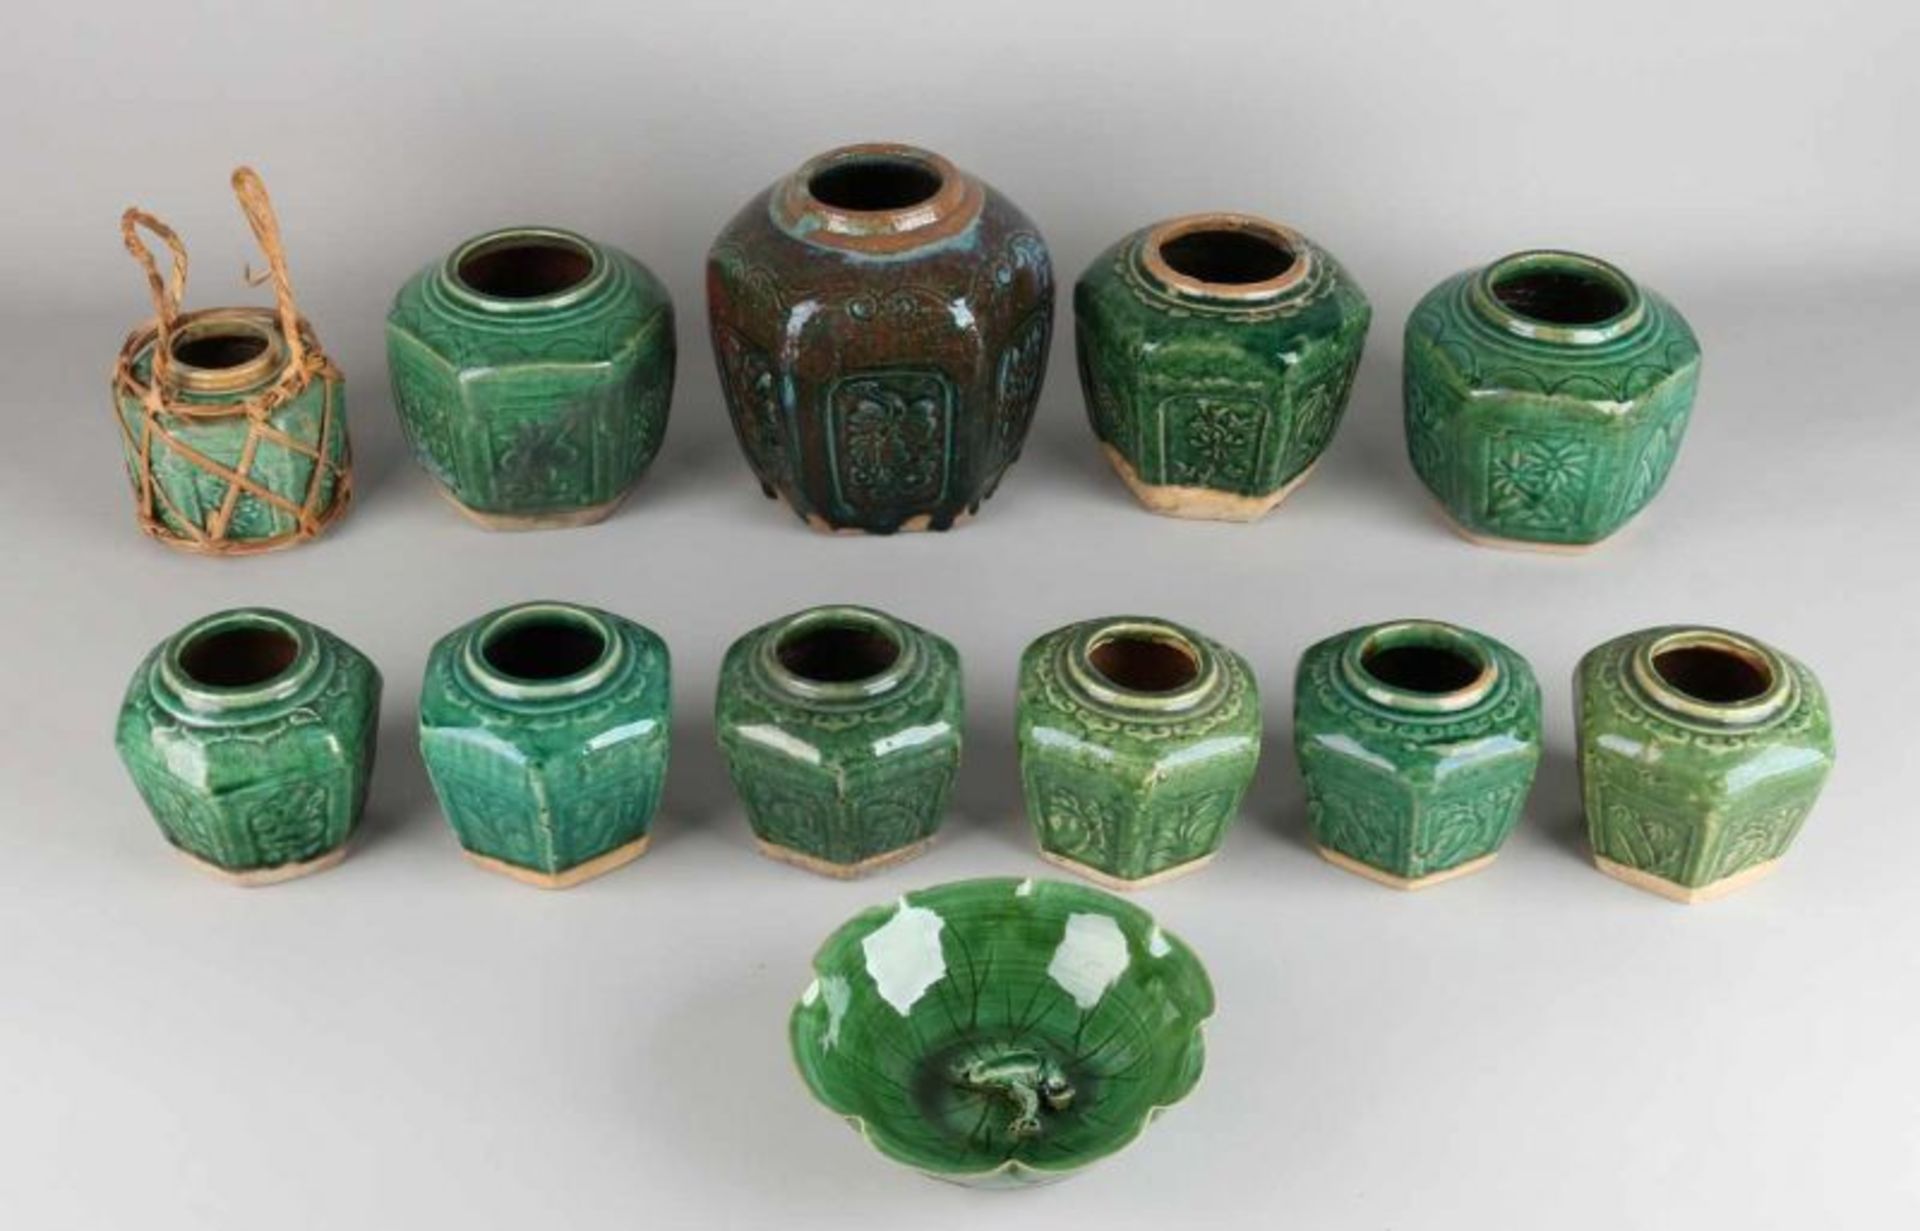 12x Ancient Chinese ceramics with green glaze. Consisting of: 11x ginger kitty + 1x lily leaf bowl